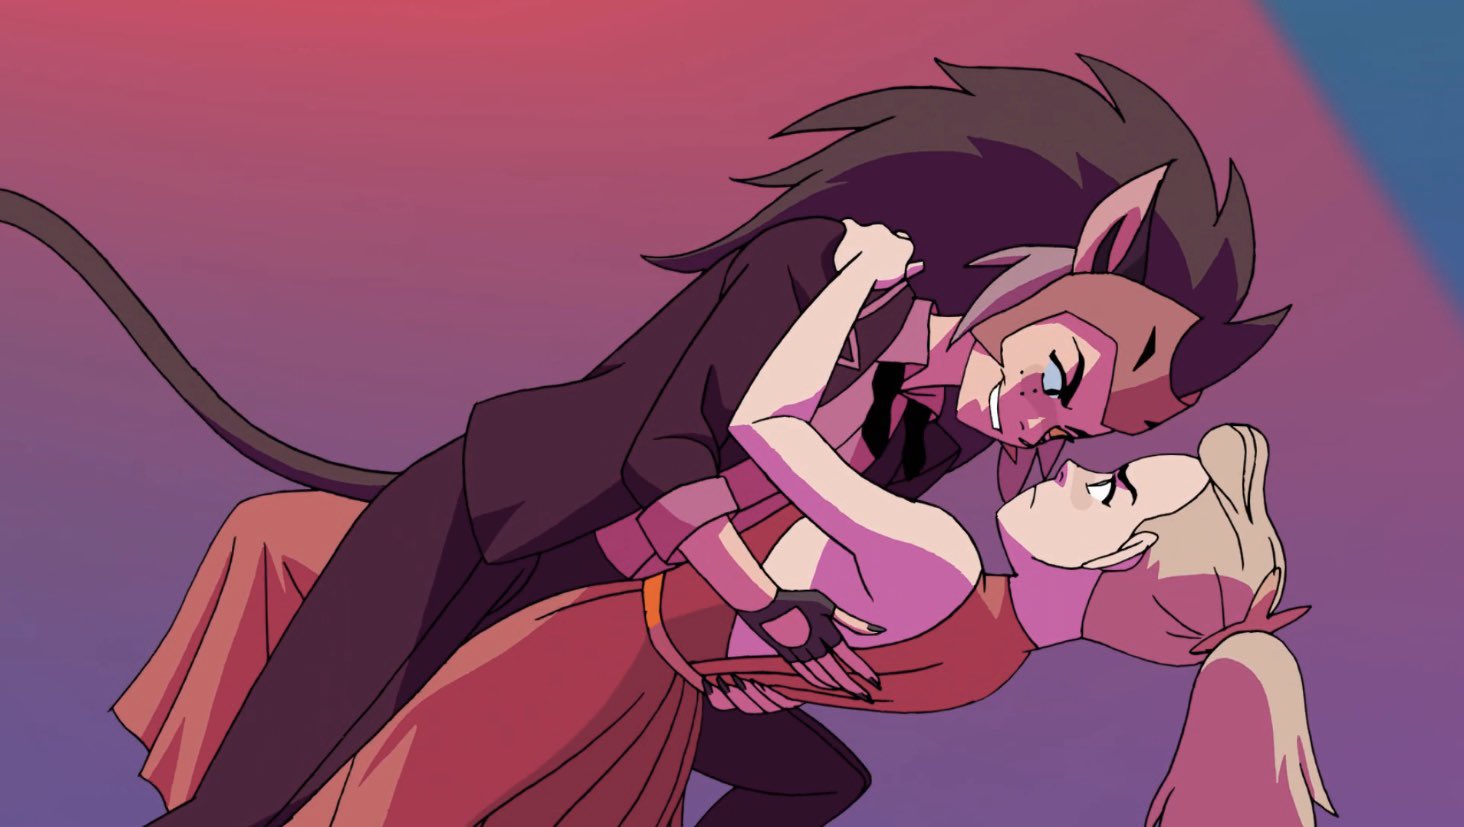 Catra and Adora dance in She-Ra and the Princesses of Power.